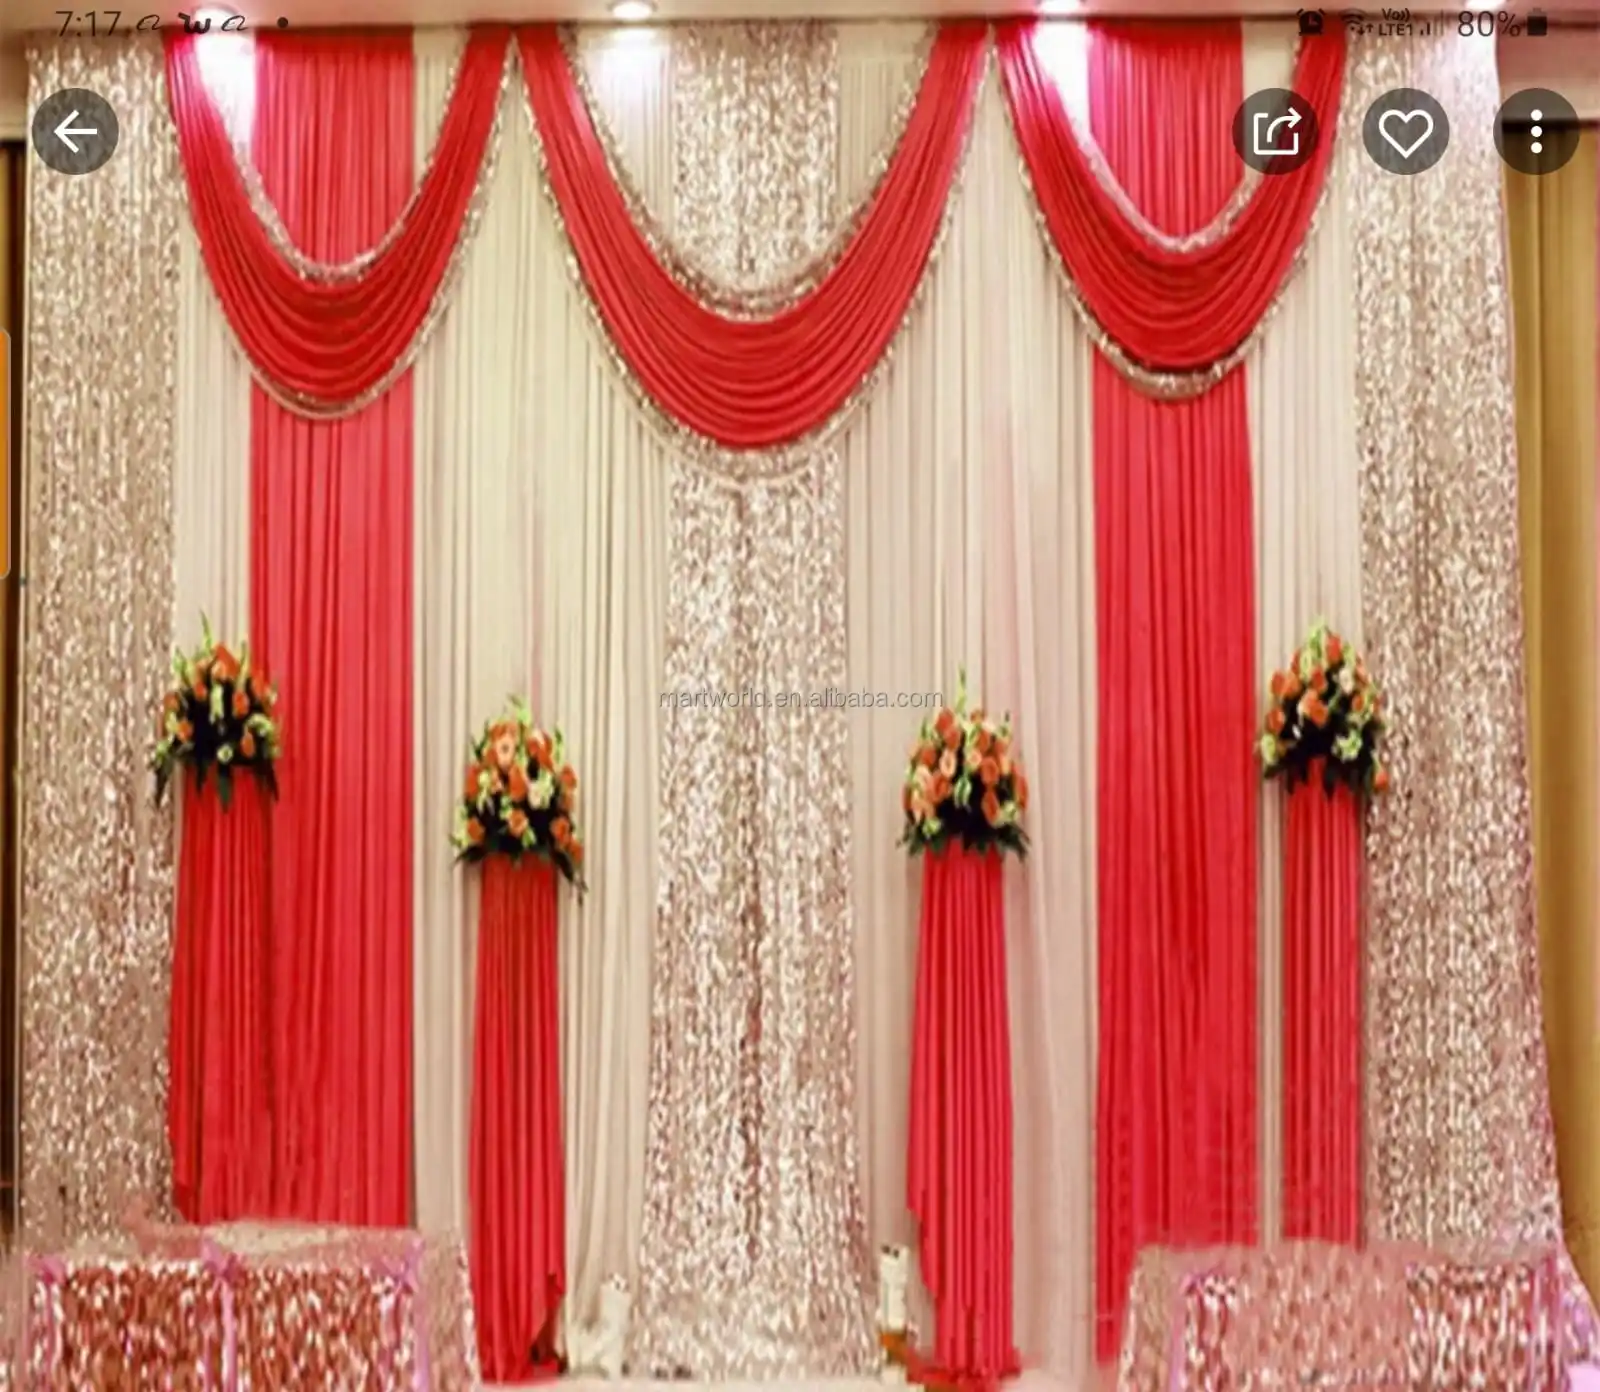 10*10 Wedding Decoration Fabric Drapes Large Stage Backdrops For Display  Party Events Wedding Draping Backdrop Curtain (bd-004) - Buy Stage Backdrops  For Sale,Fabric Backdrops For Weddings,Wedding Decoration Stage Backdrops  White Product on